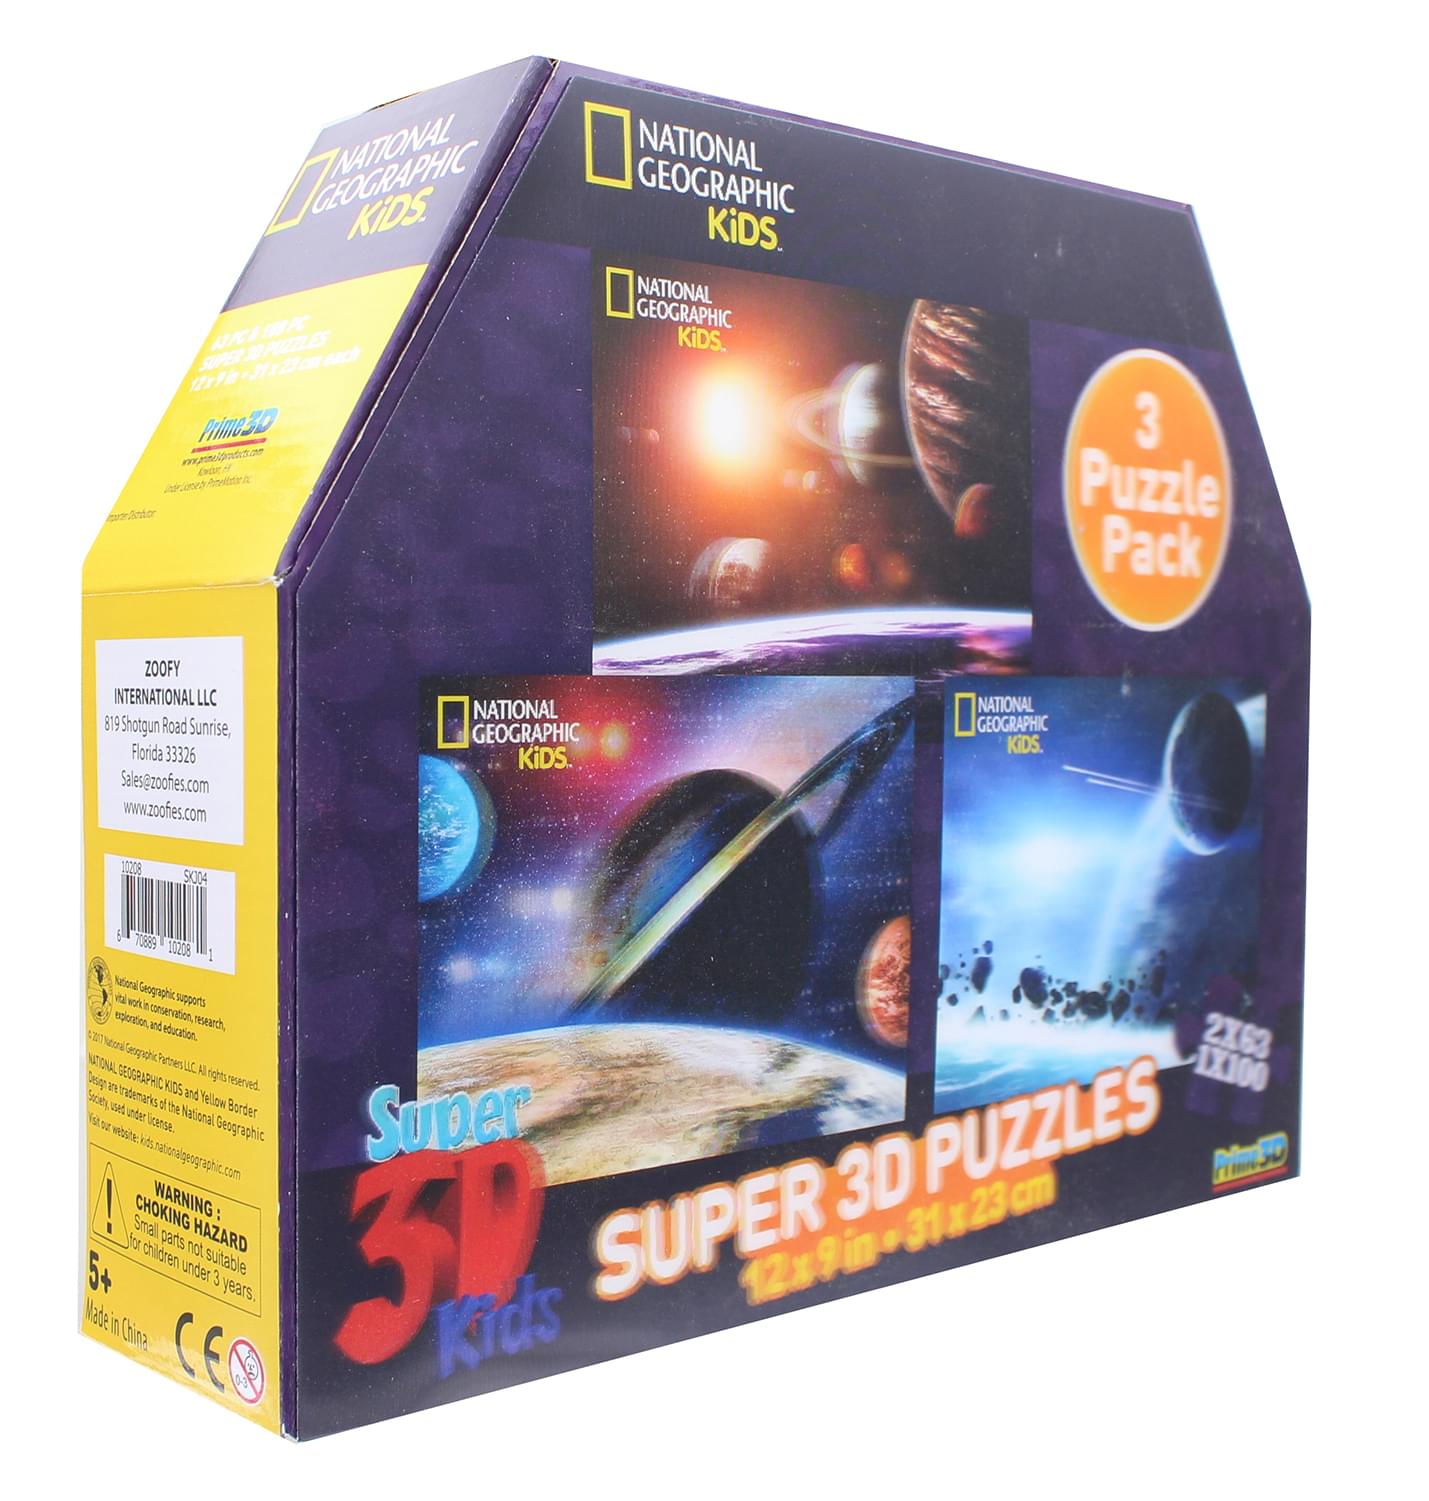 National Geographic- Super 3D Children's 63/100pc Space Puzzle  Set  of 3 12" x 9"